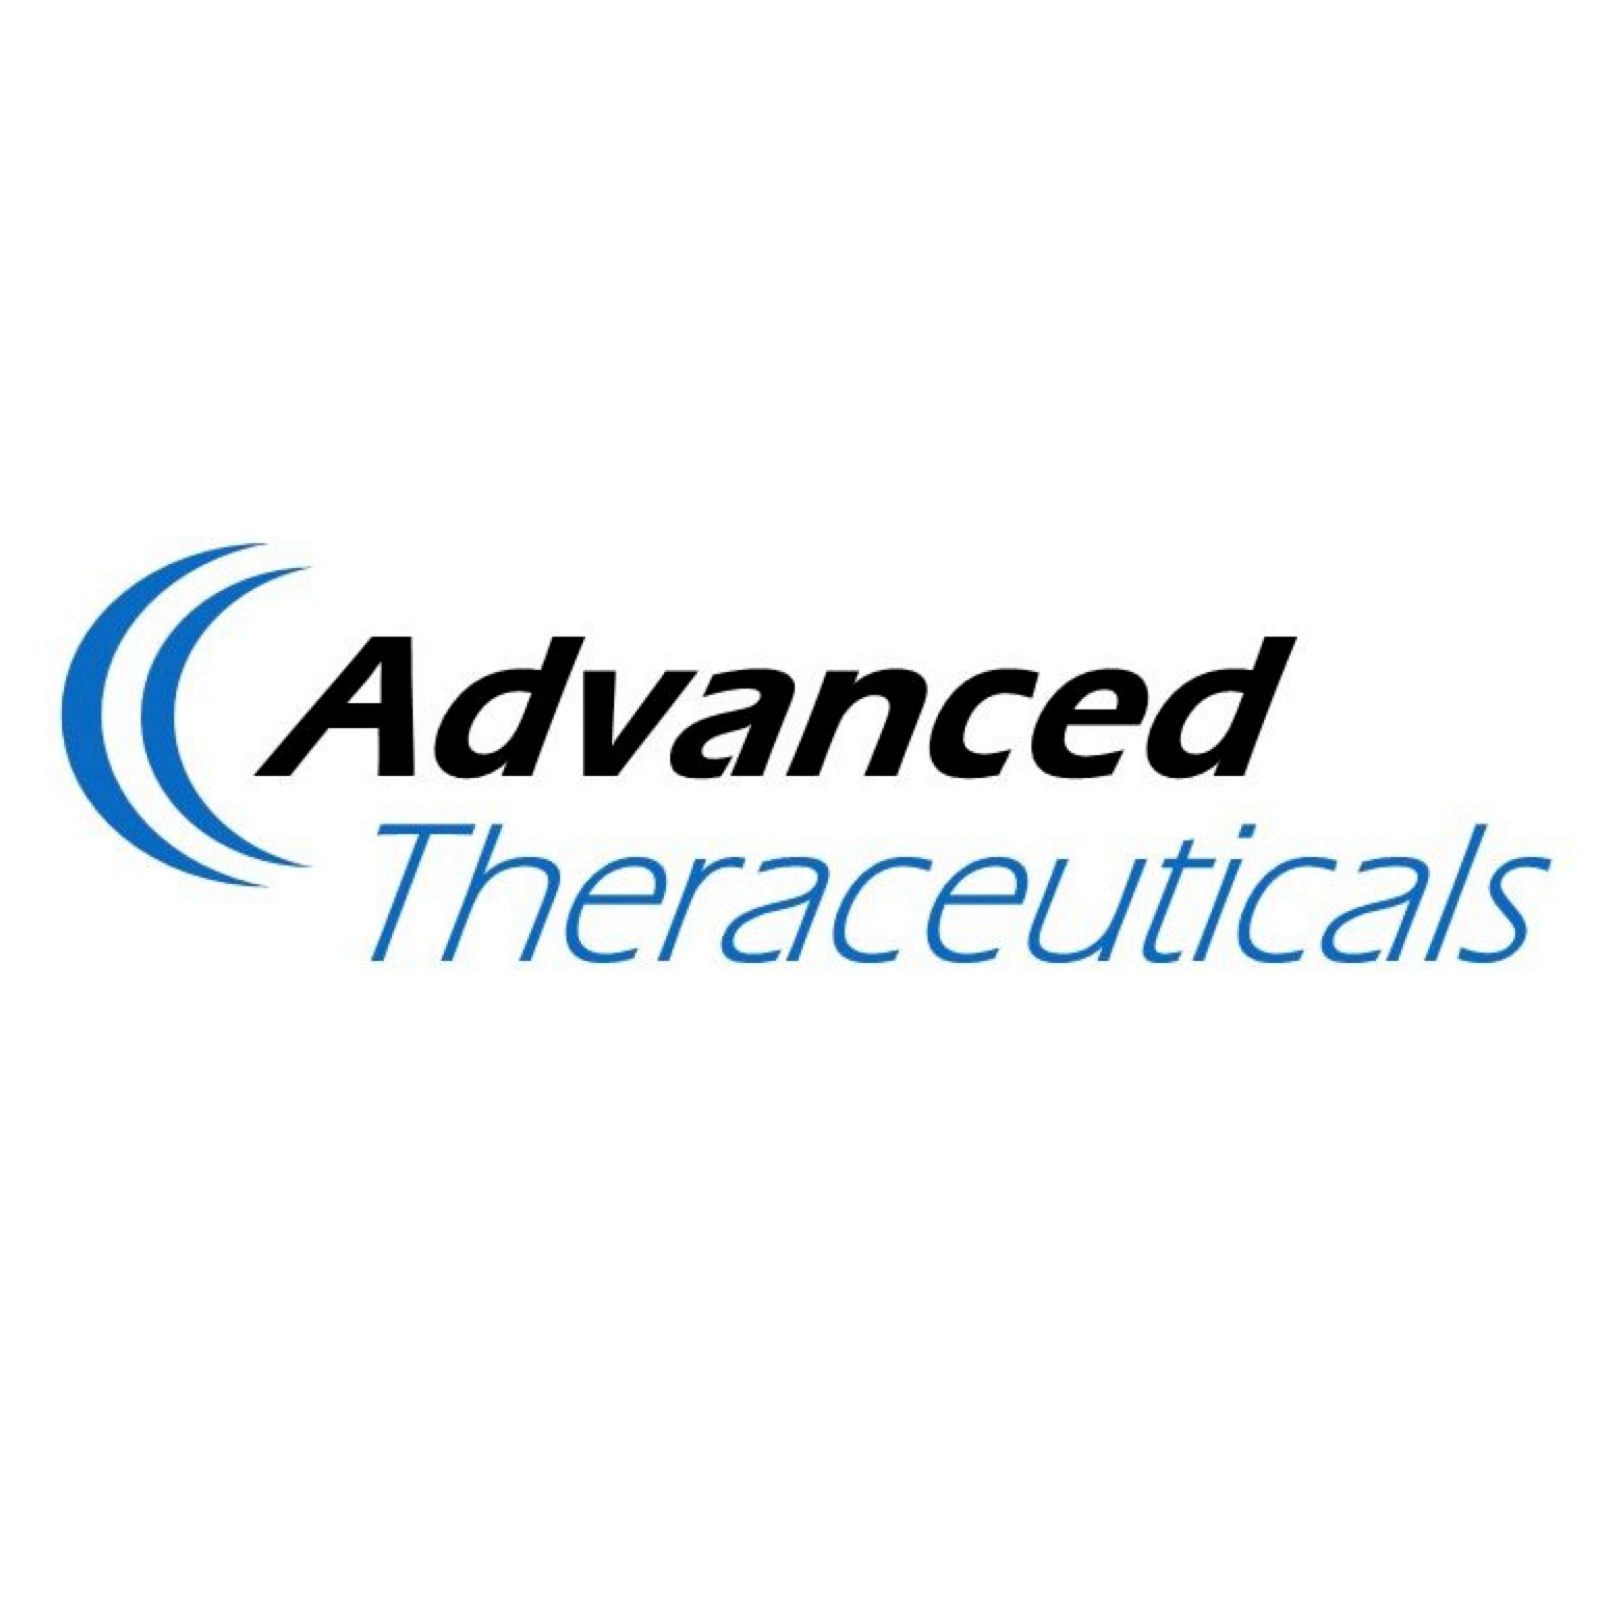 Advanced Theraceuticals